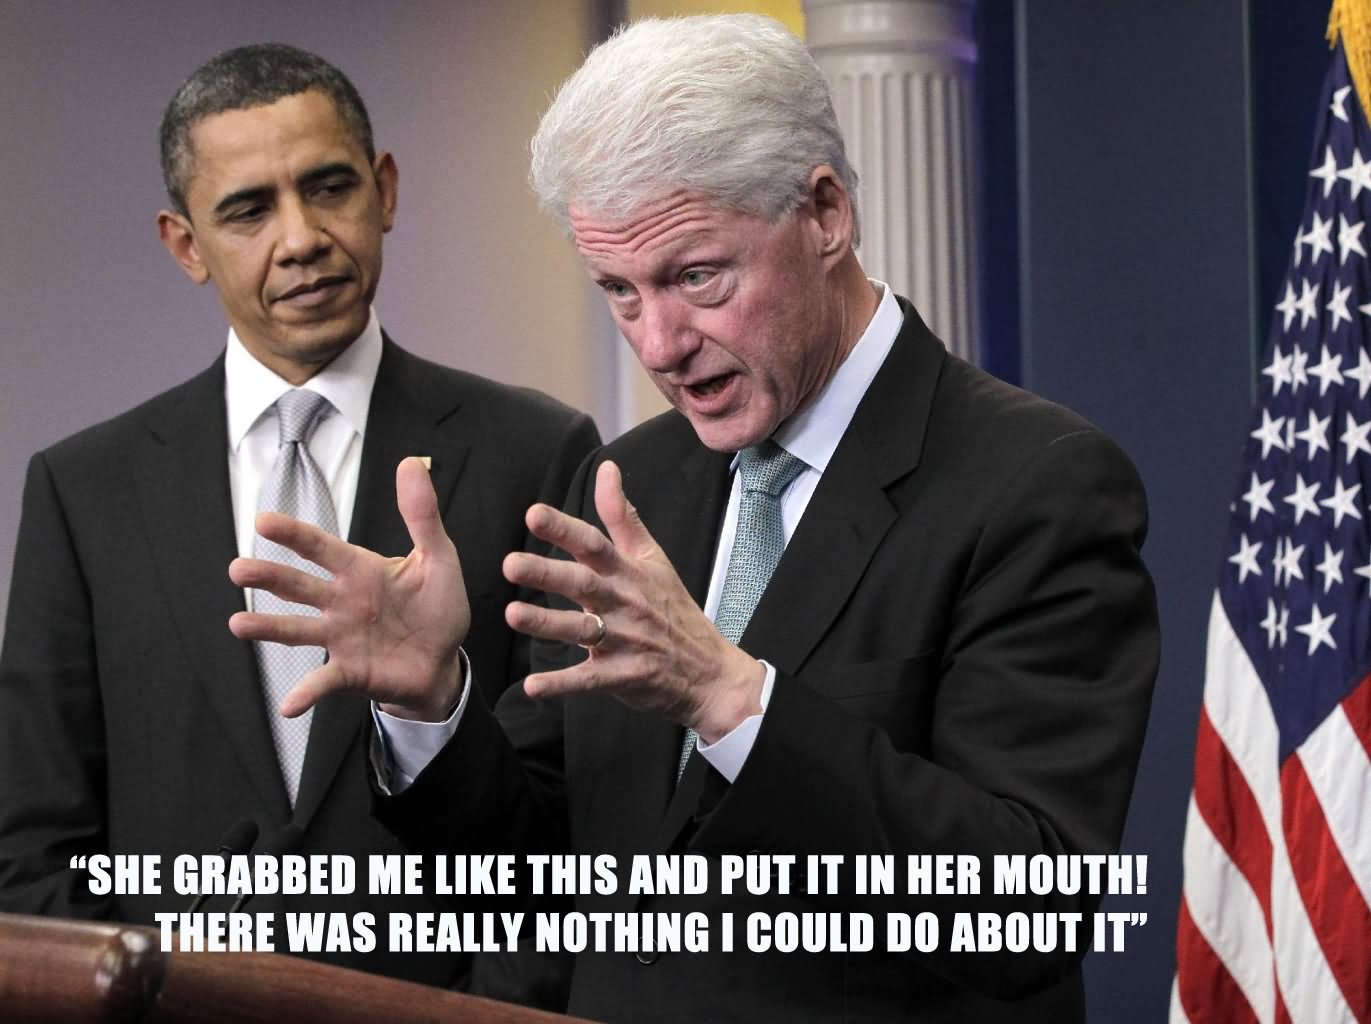 She Grabbed Me Like This And Put It In Her Mouth Very Funny Bill Clinton Meme Picture